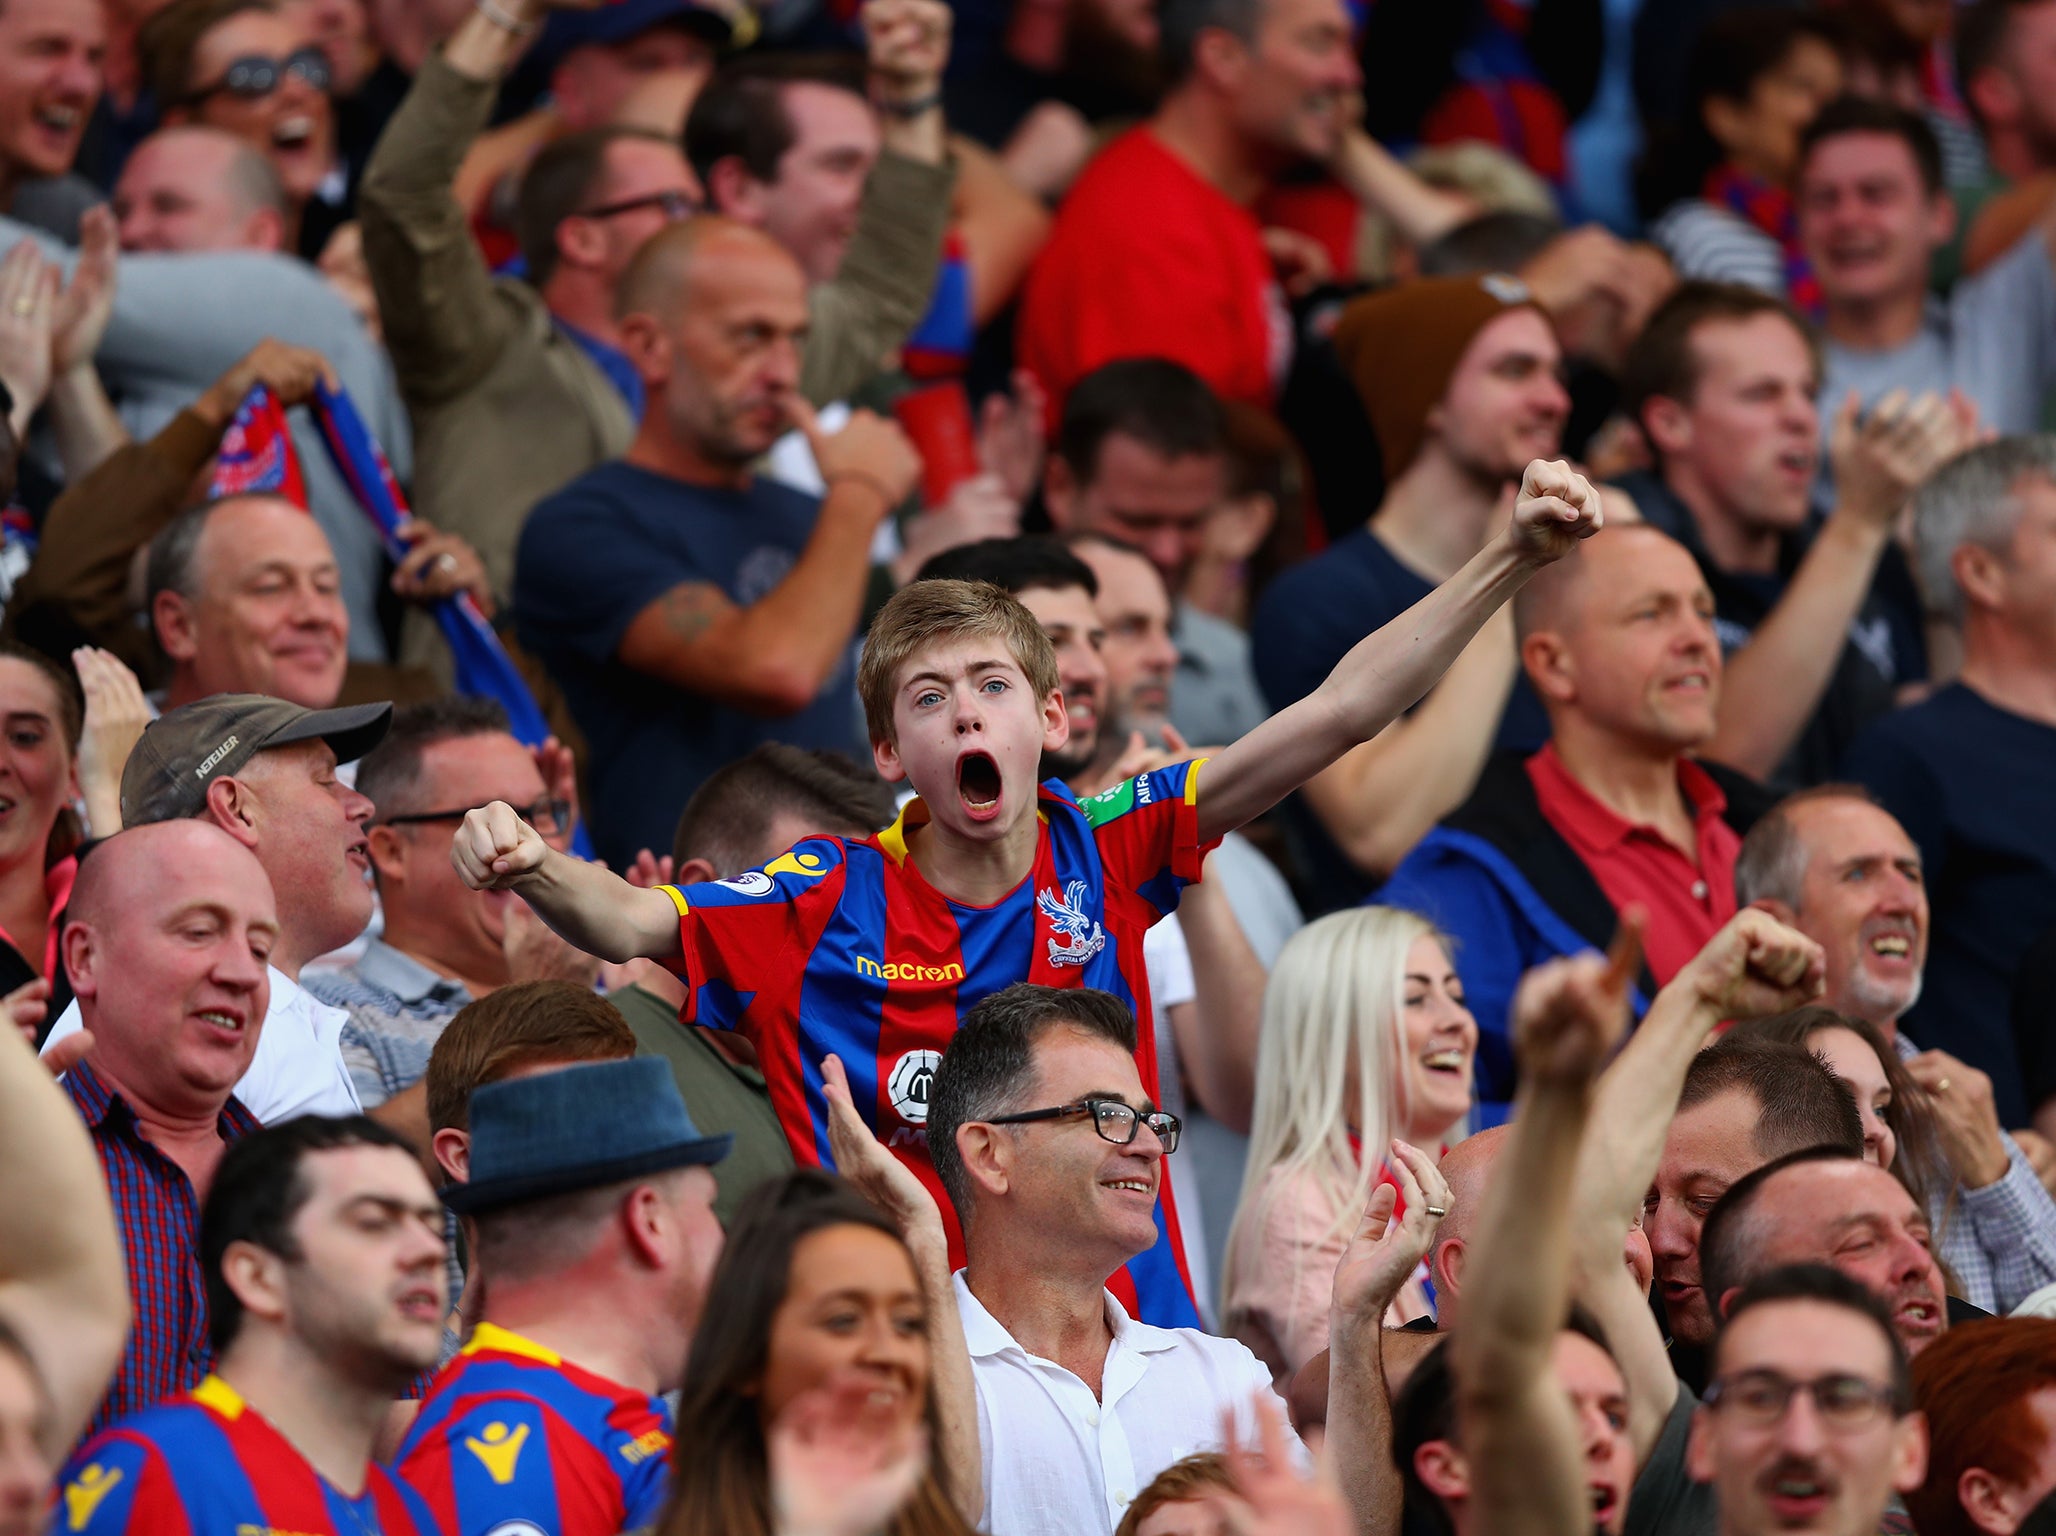 Palace picked up their first win of the season against defending champions Chelsea